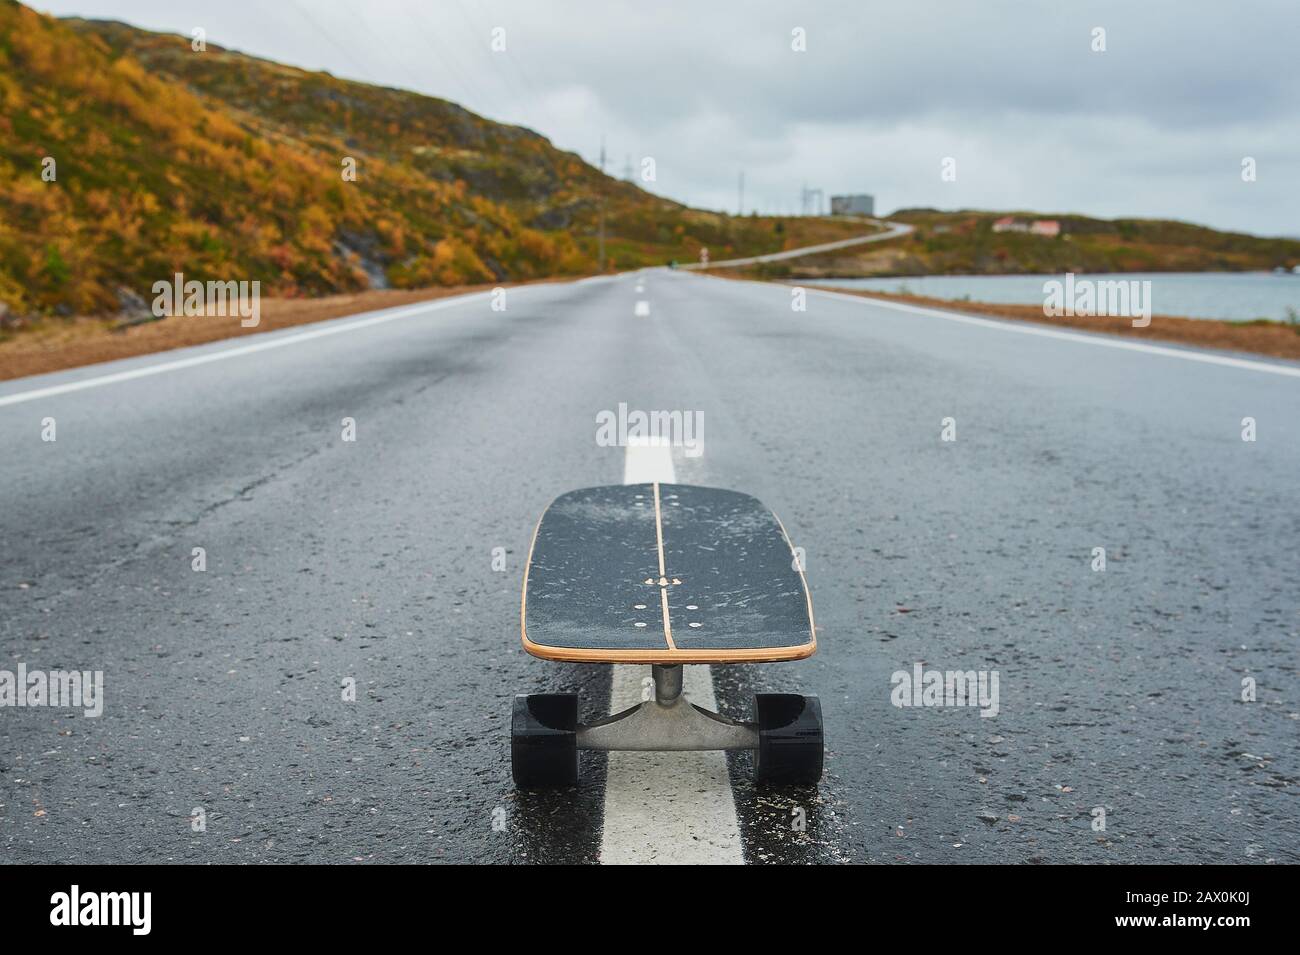 a skateboard on the road beautiful view Stock Photo - Alamy